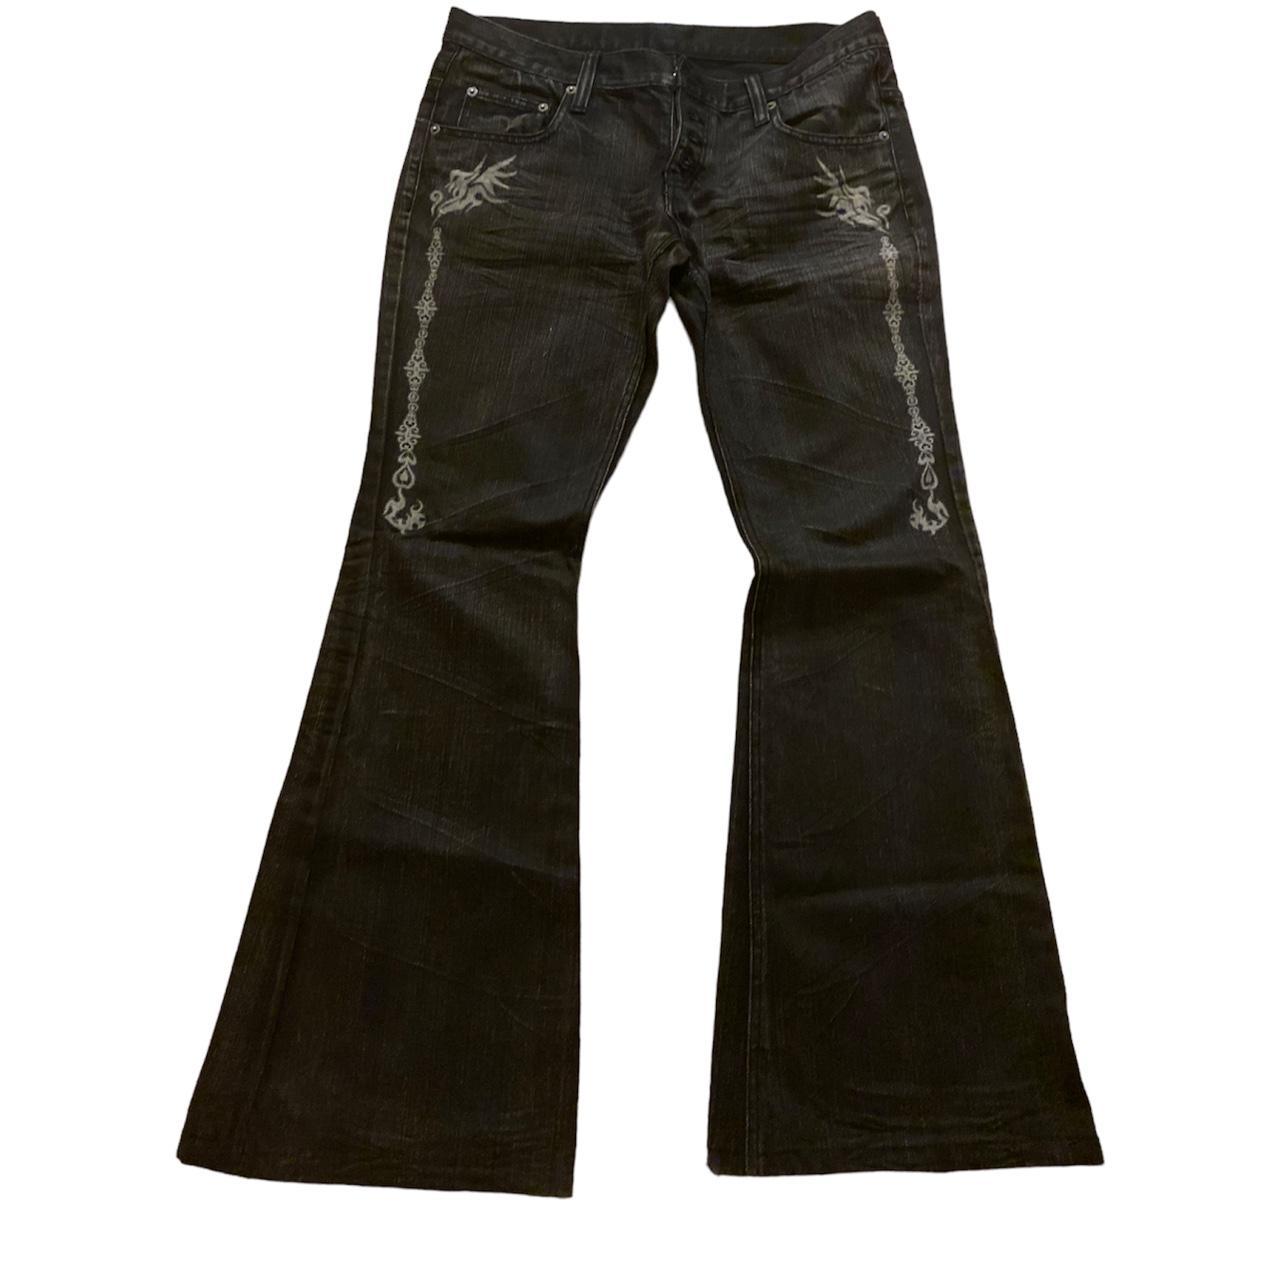 Hysteric Glamour Men's Black and Grey Jeans